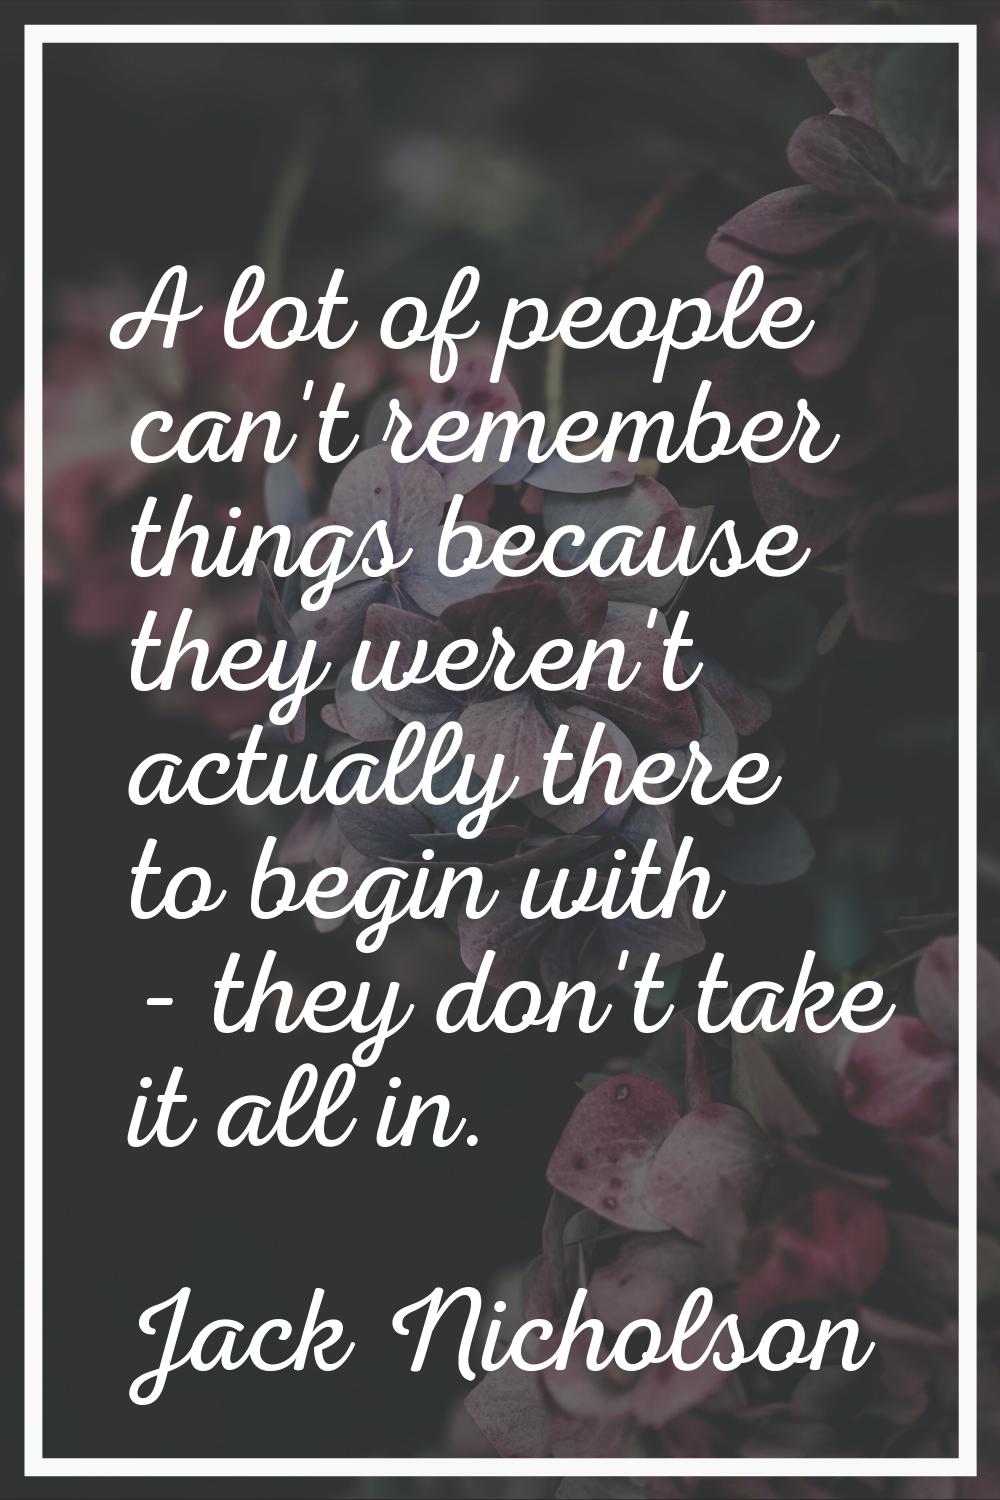 A lot of people can't remember things because they weren't actually there to begin with - they don'